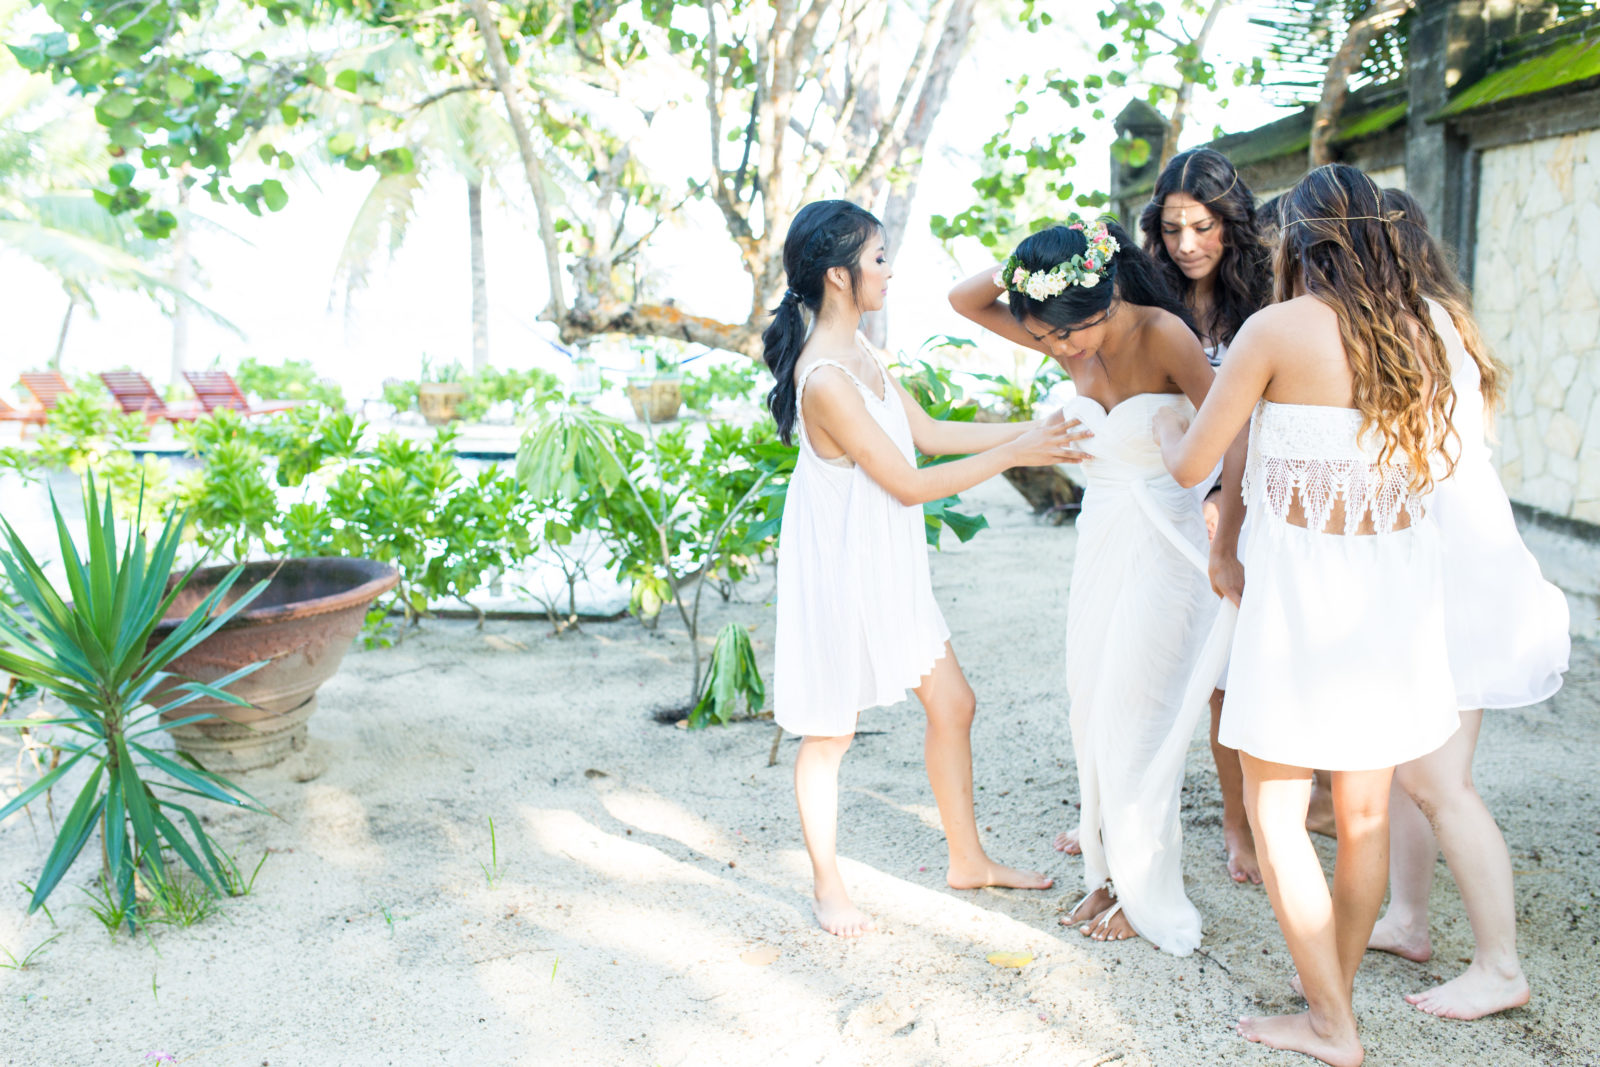 How to get the best from your bridal preparation photos.